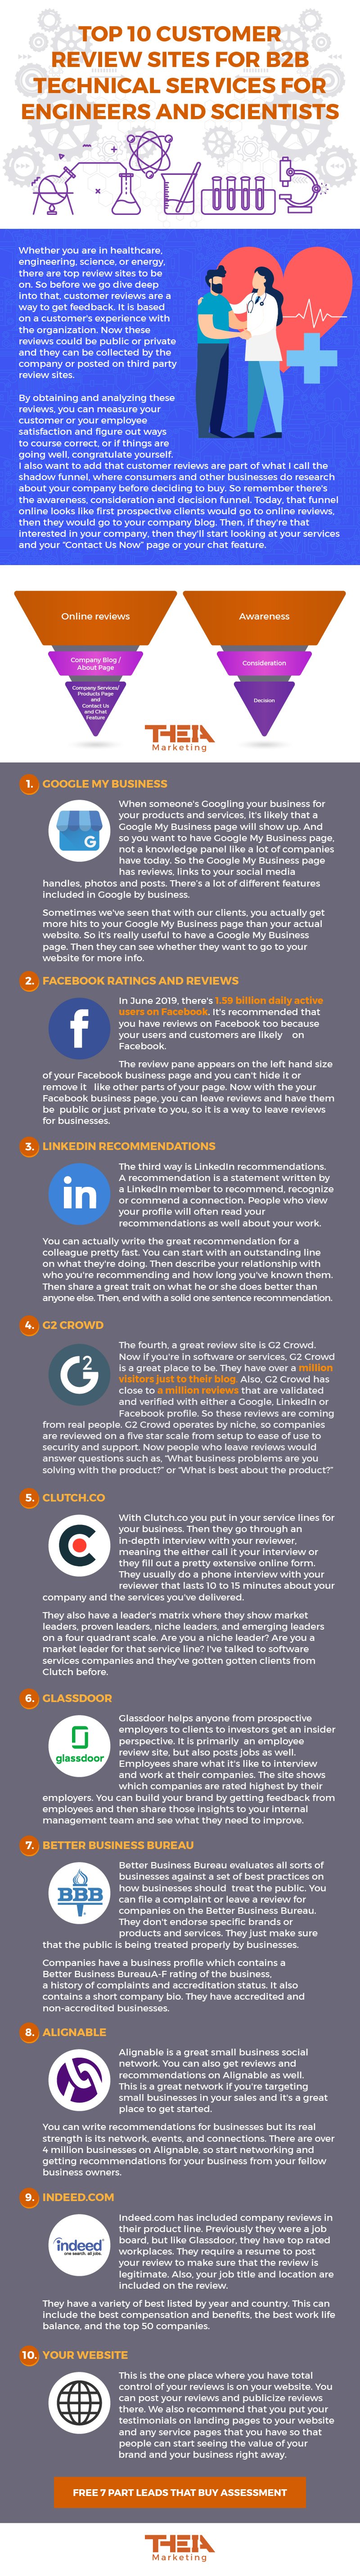 564407_Top 10 Customer Review Sites Infographic_102219